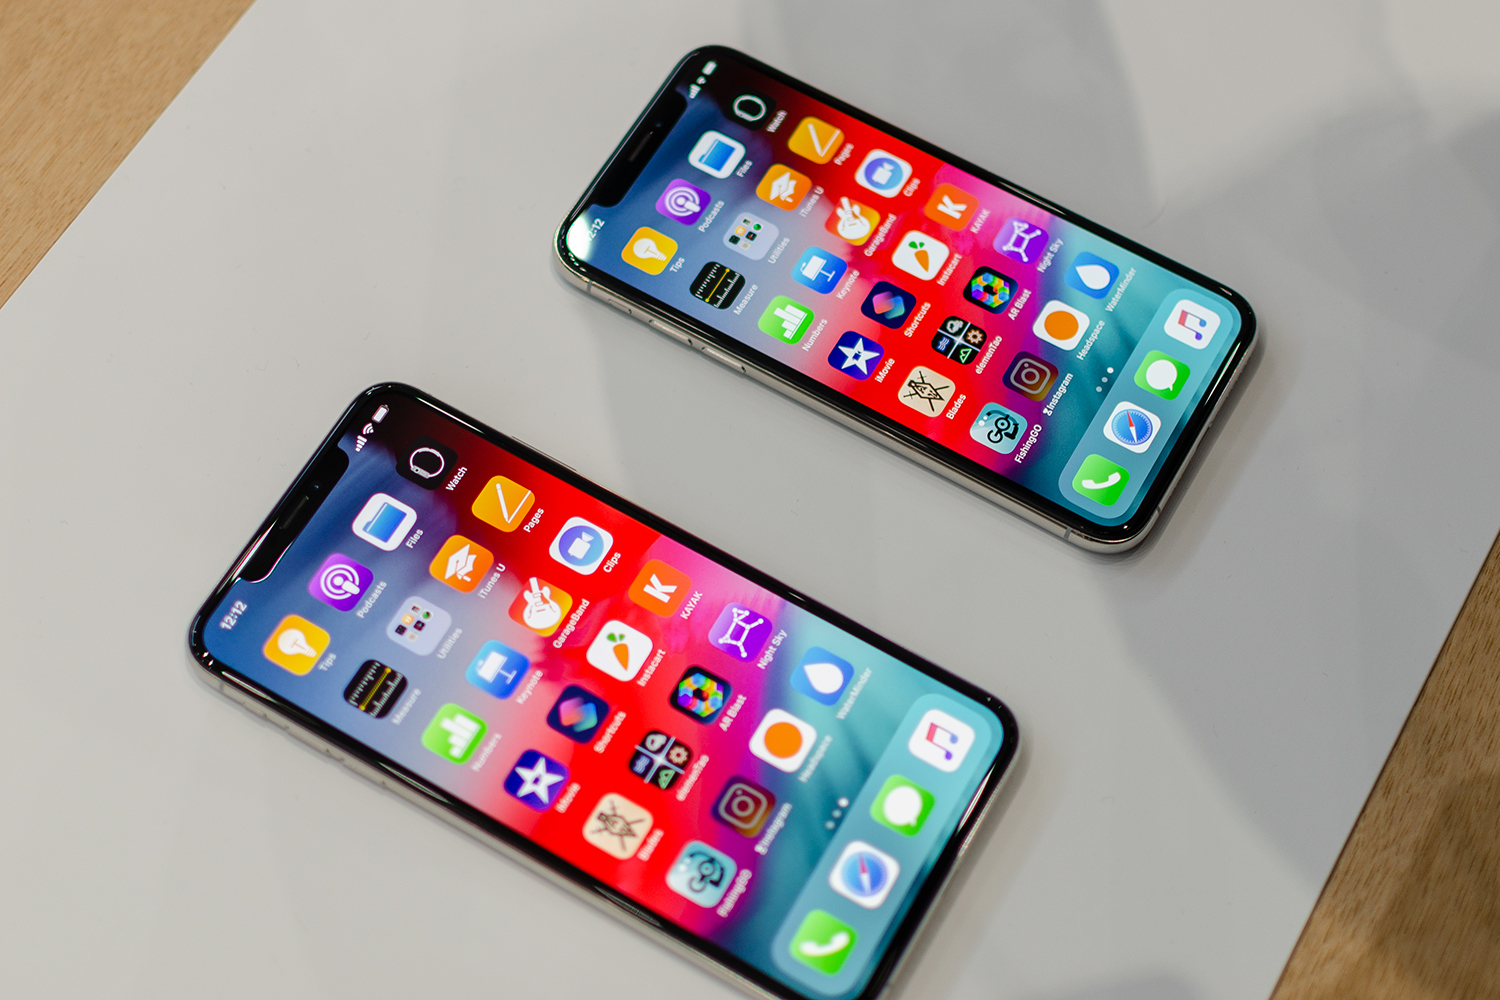 iphone xs max and xr photo galleries apple hands on 12